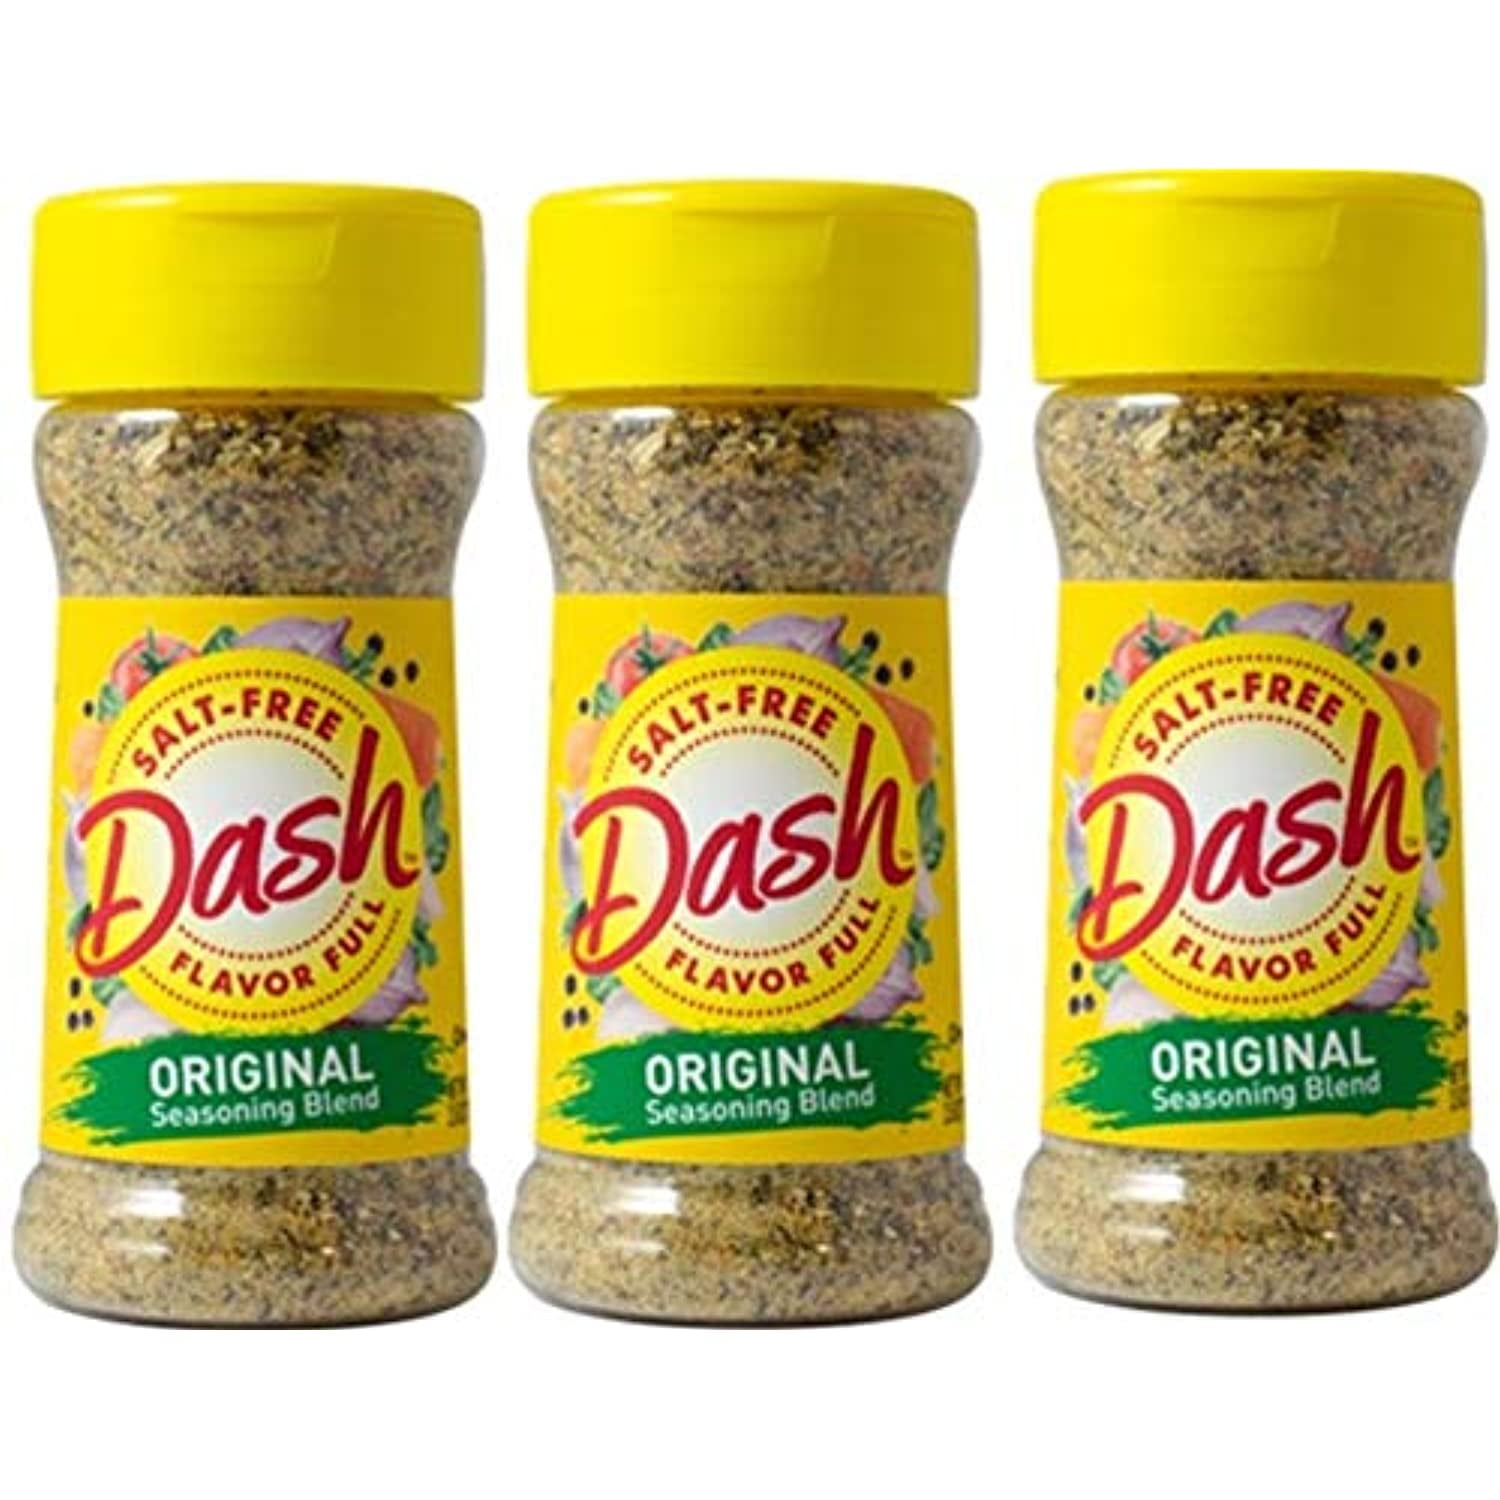 Mrs. Dash Seasoning reviews in Grocery - FamilyRated (page 5)